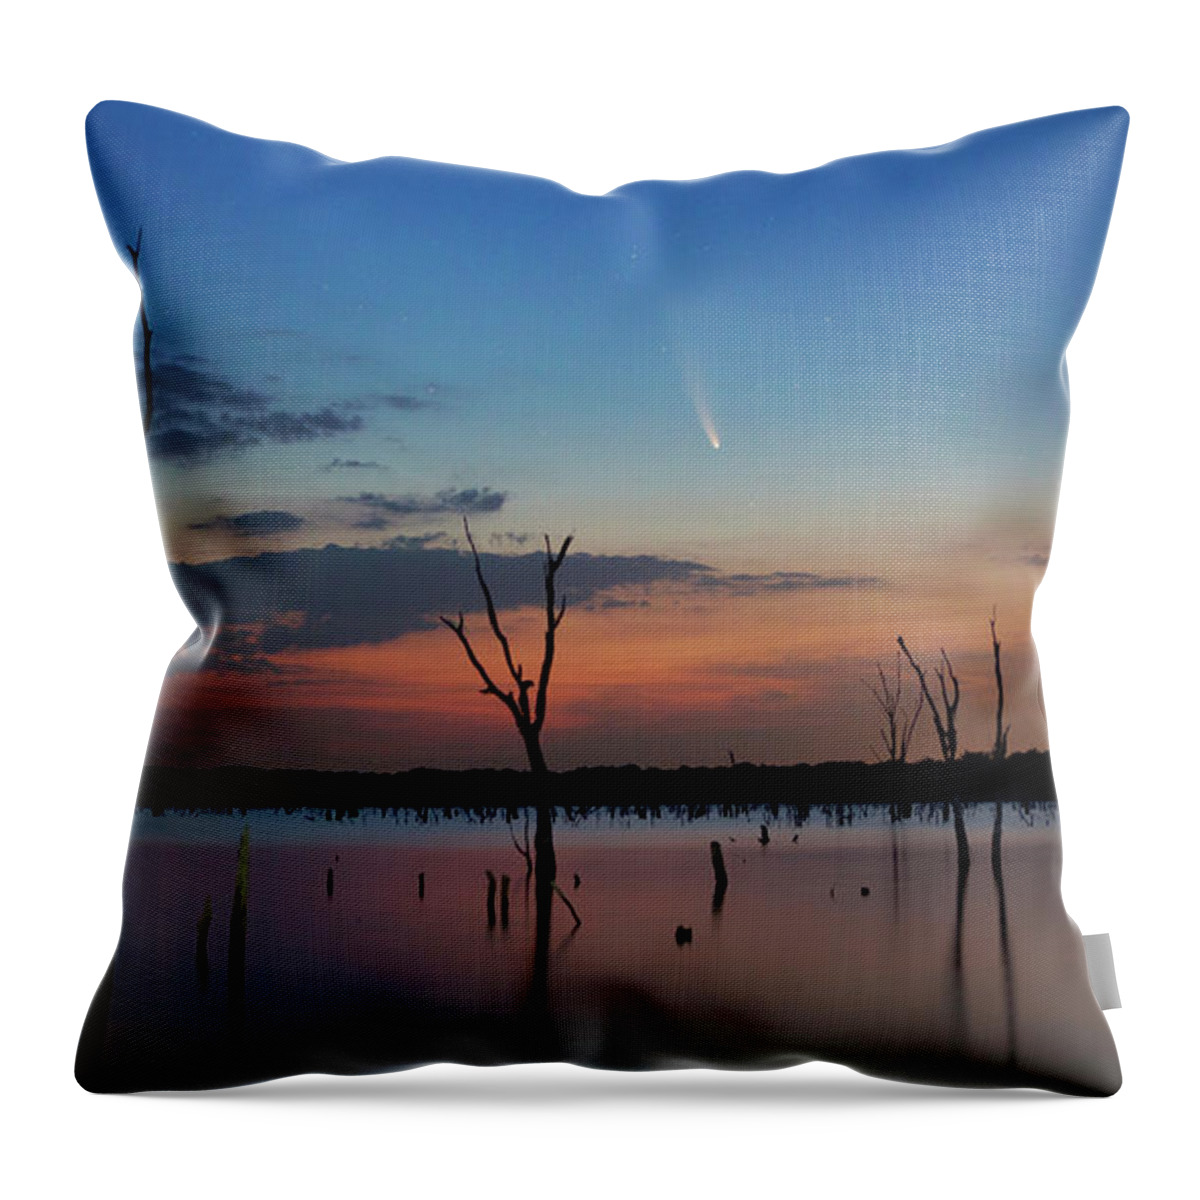 Comet Neowise Throw Pillow featuring the photograph Comet Neowise over Lake by Keith Kapple